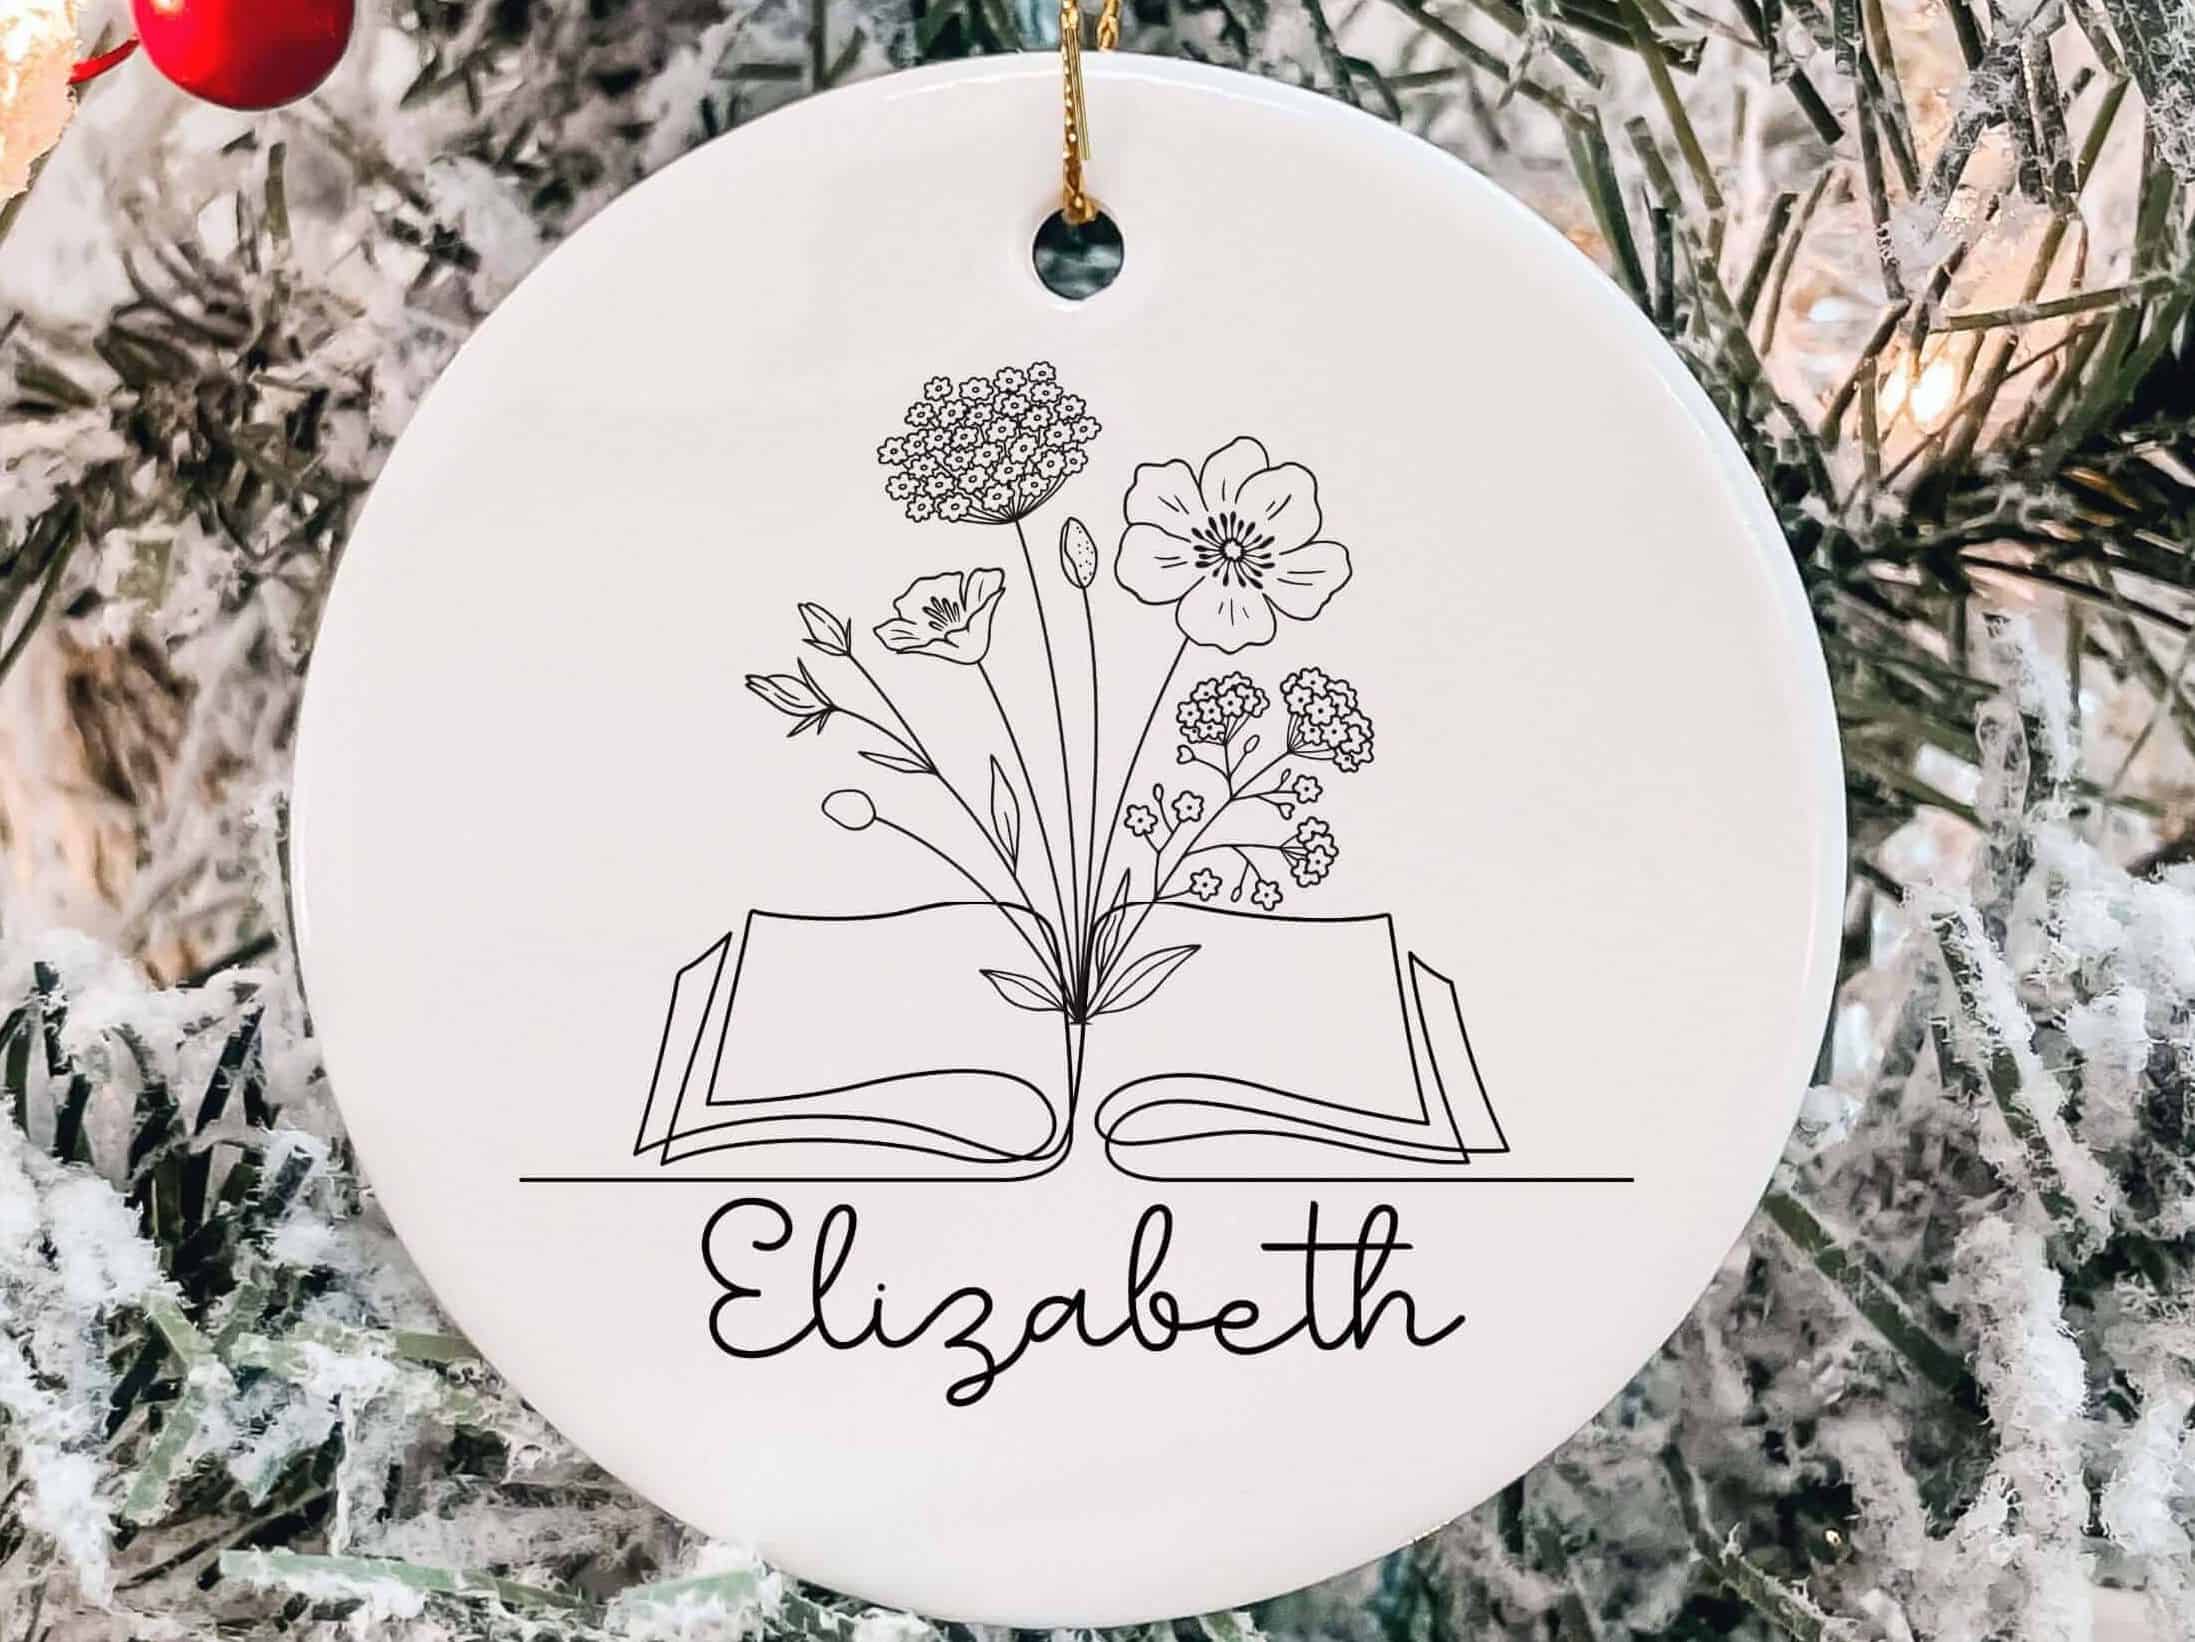 White holiday ornament with a drawing of a book with wildflowers growing out of it, and the name Elizabeth below